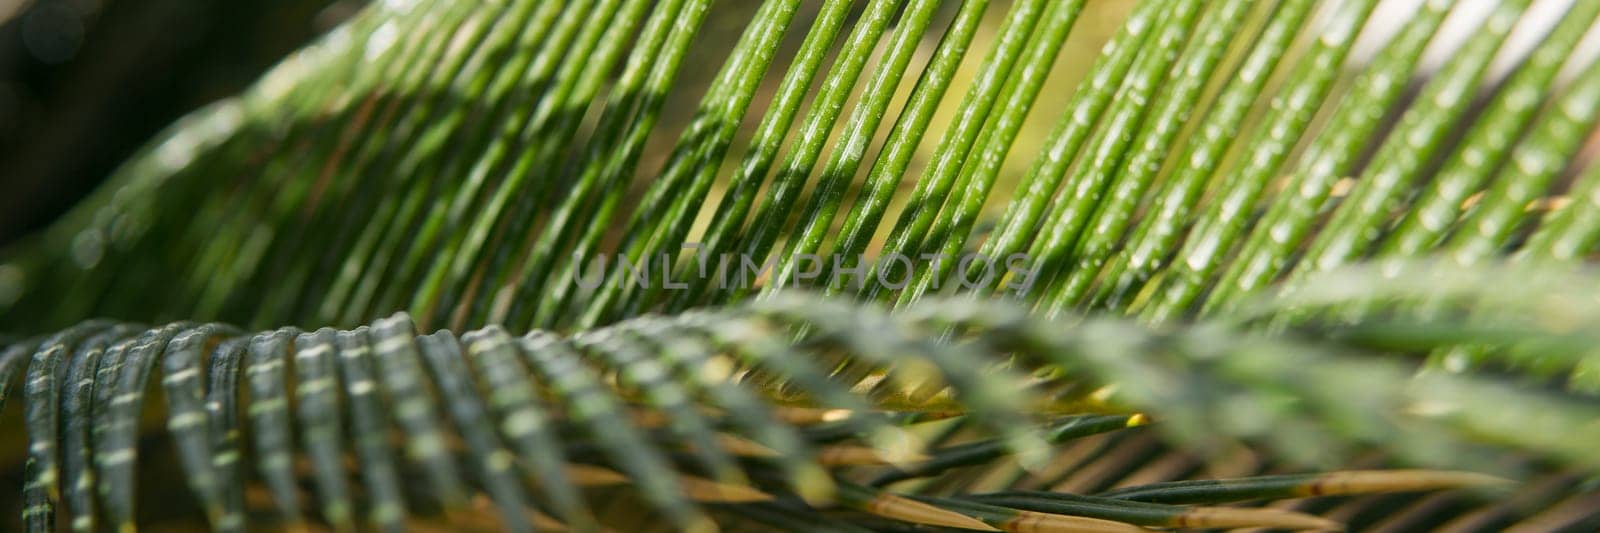 Green palm leaves, natural background by Annu1tochka